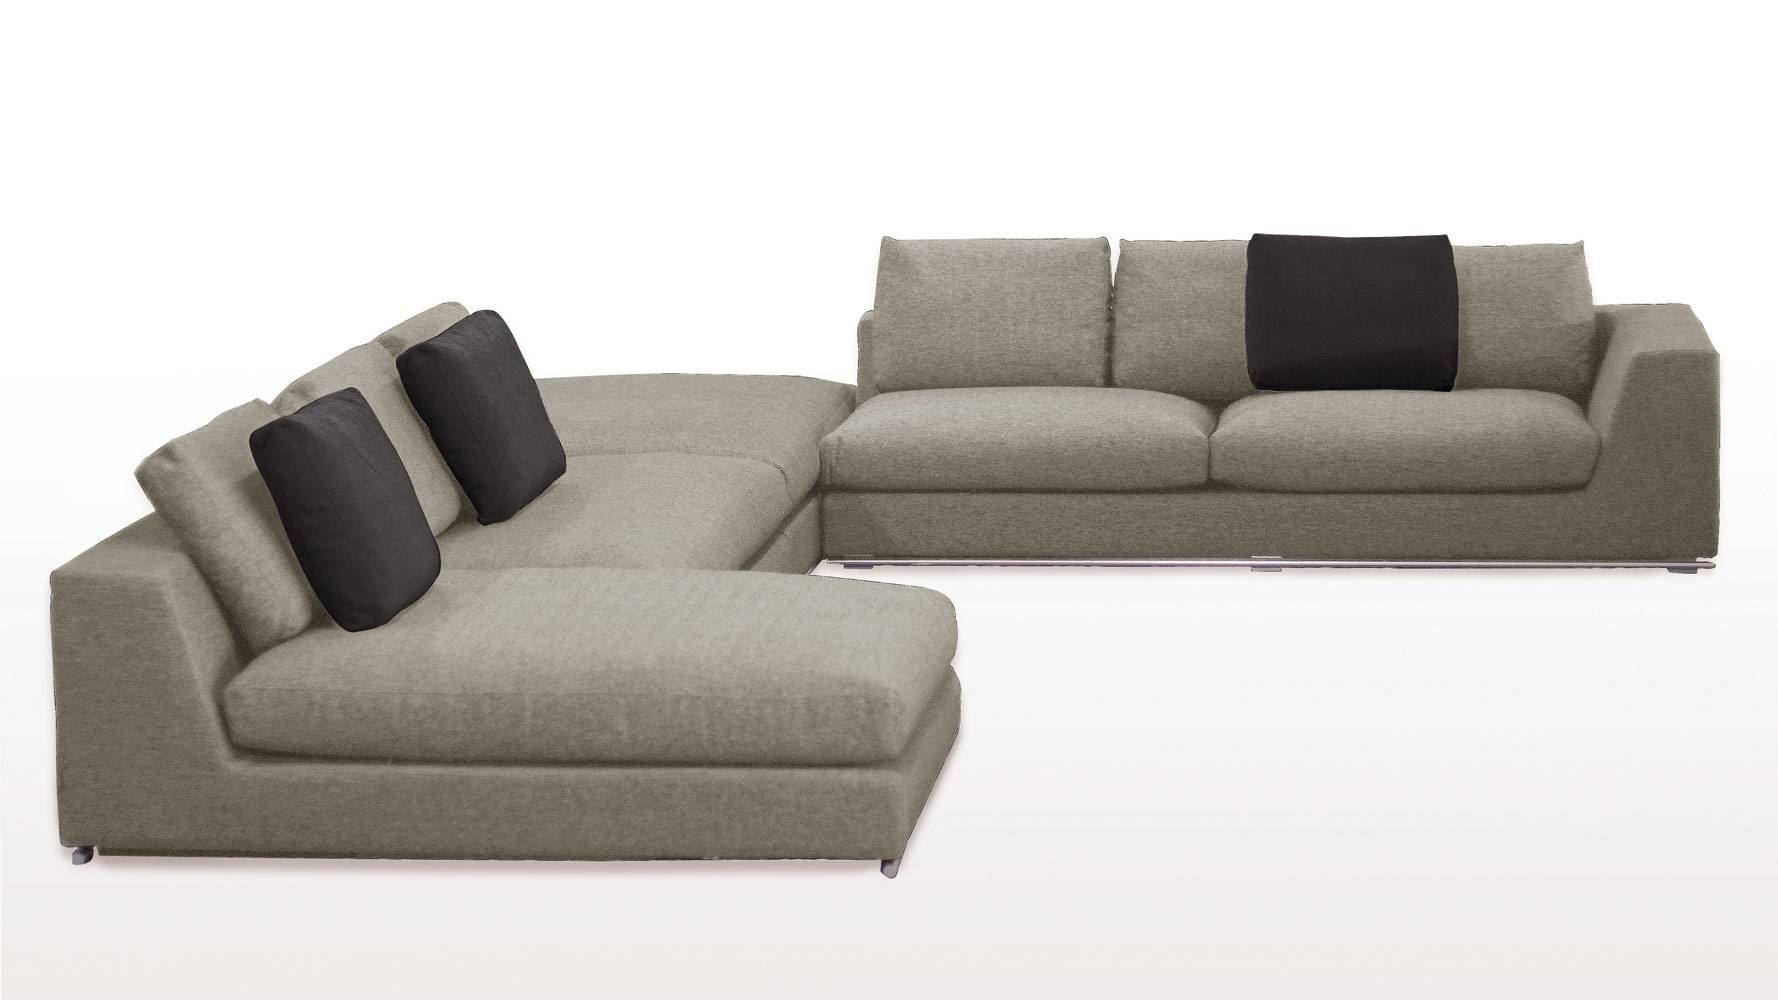 Comodo Sectional Sofa With Ottoman – Grey | Zuri Furniture Intended For Goose Down Sectional Sofas (View 7 of 15)